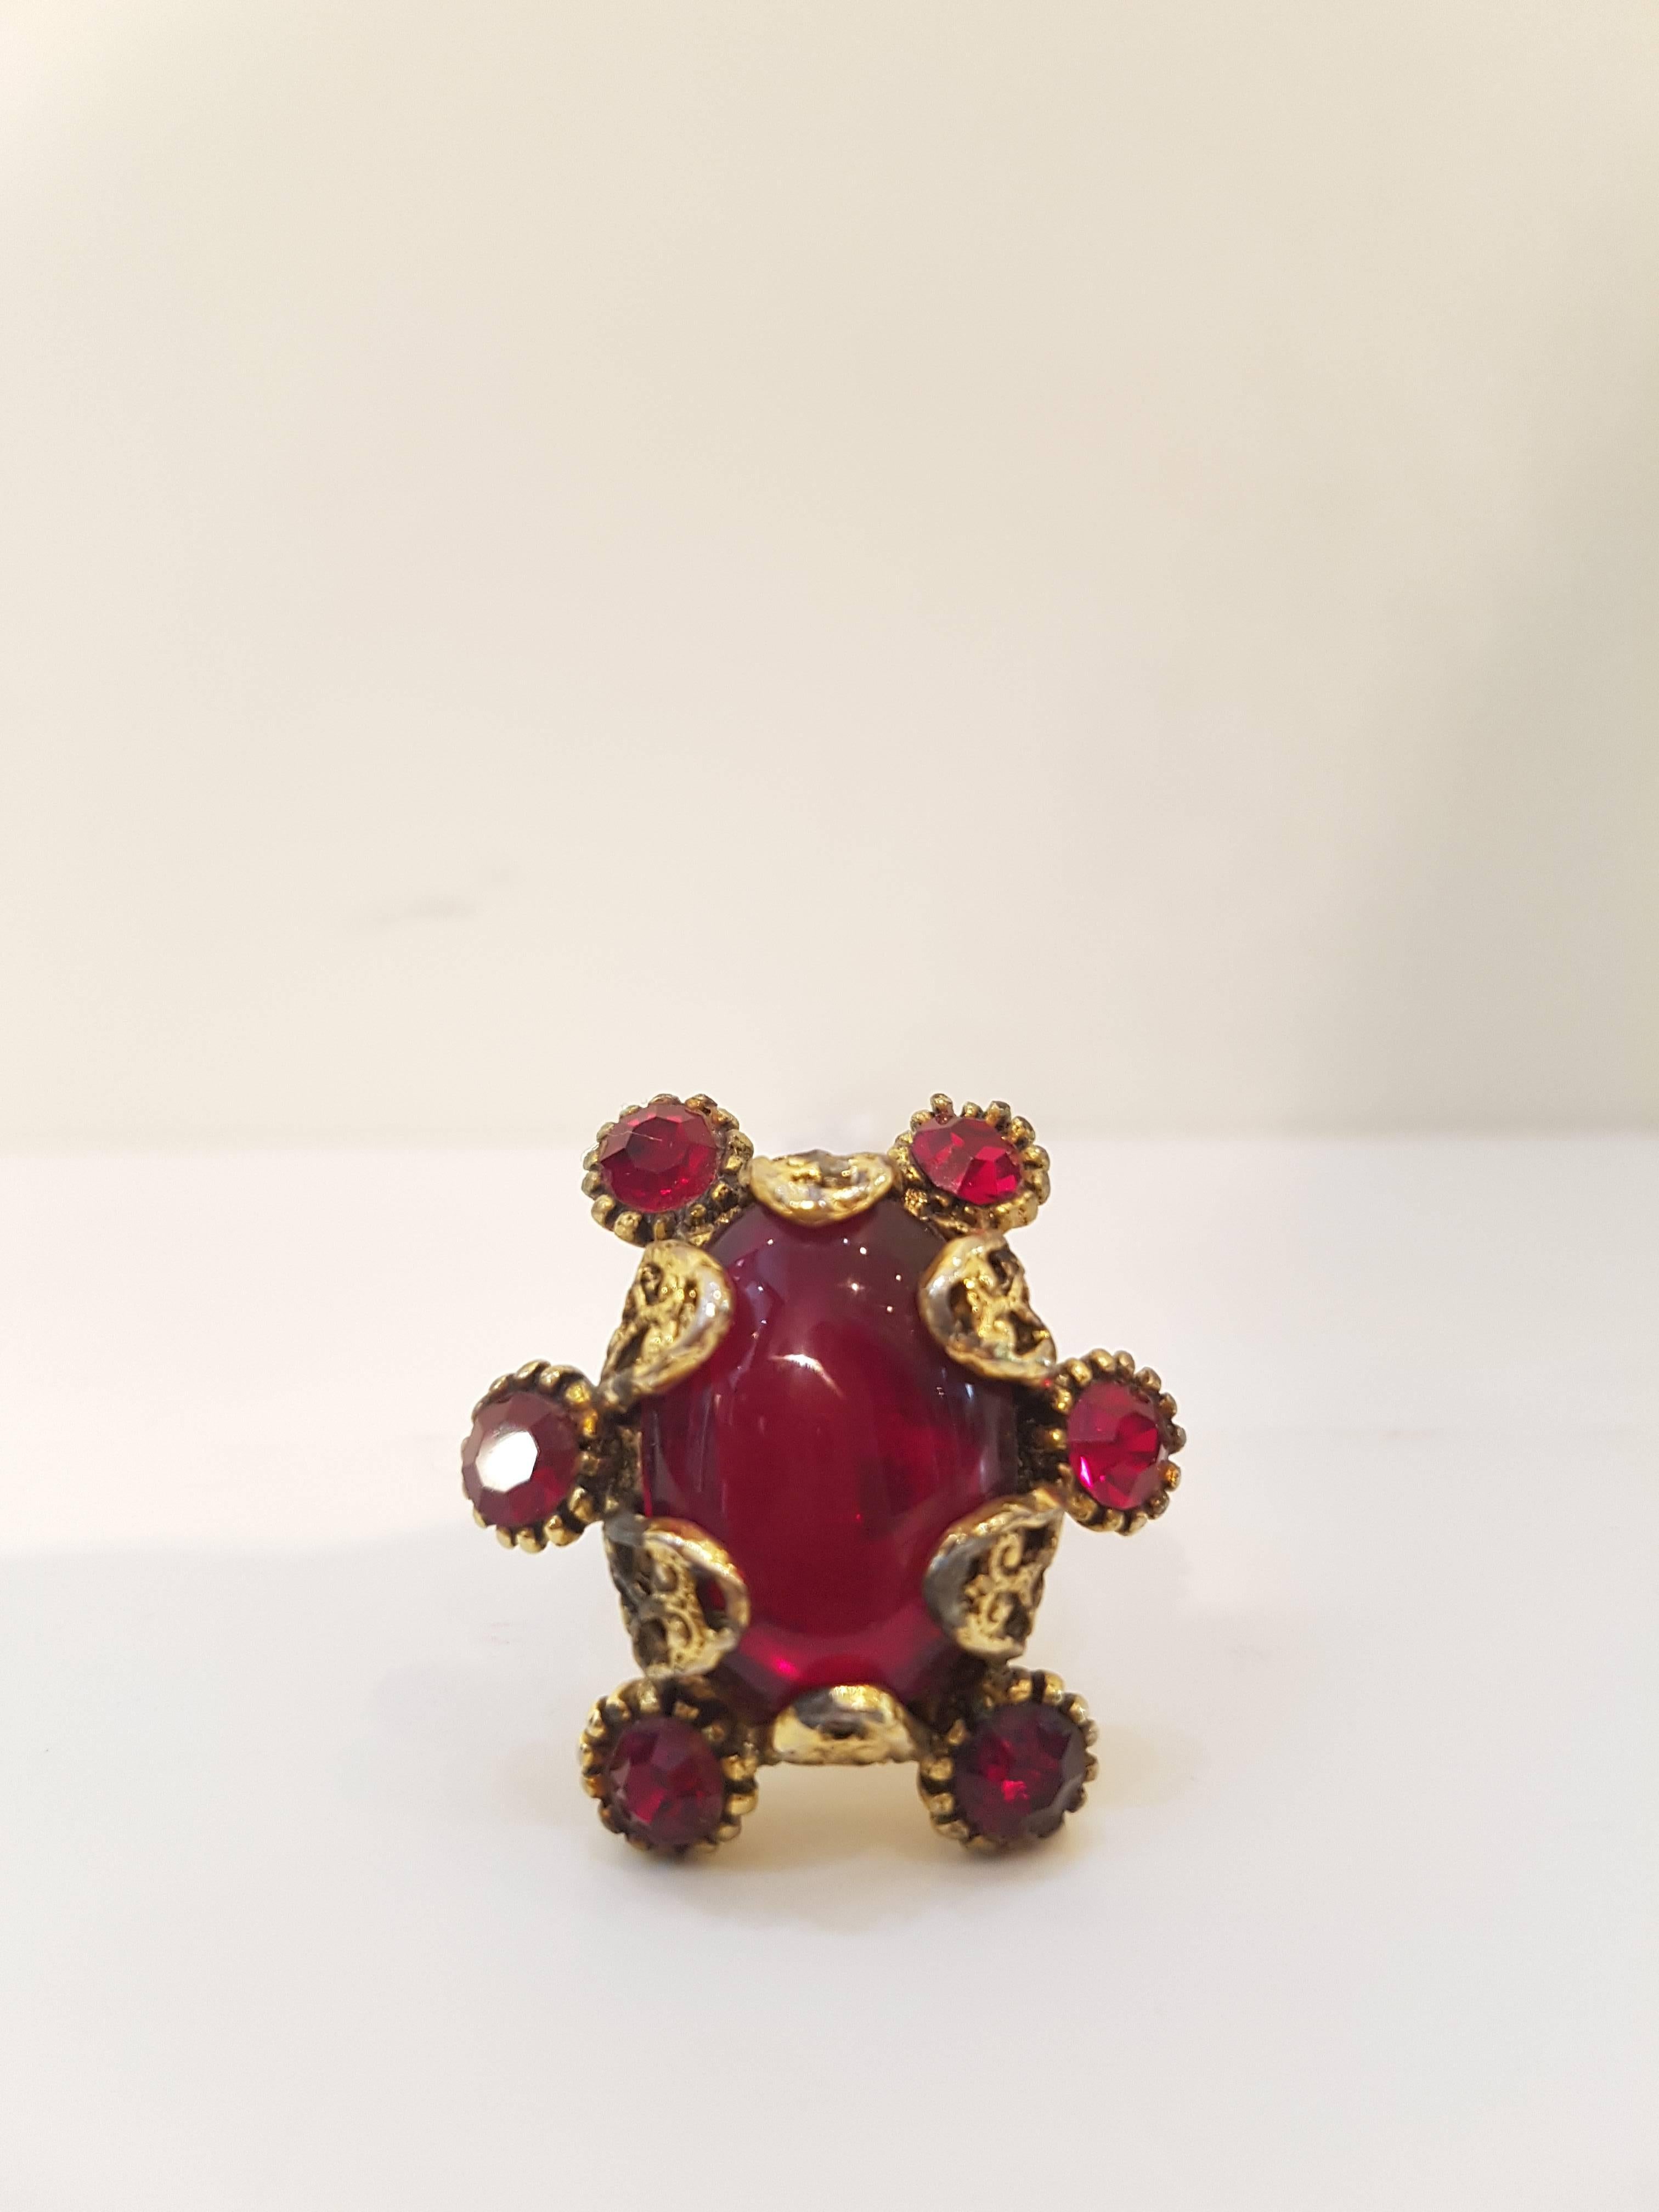 1980s Hollycraft red tone ring

Gold tone ring with red tone stones all aroung
size can be easily alterated